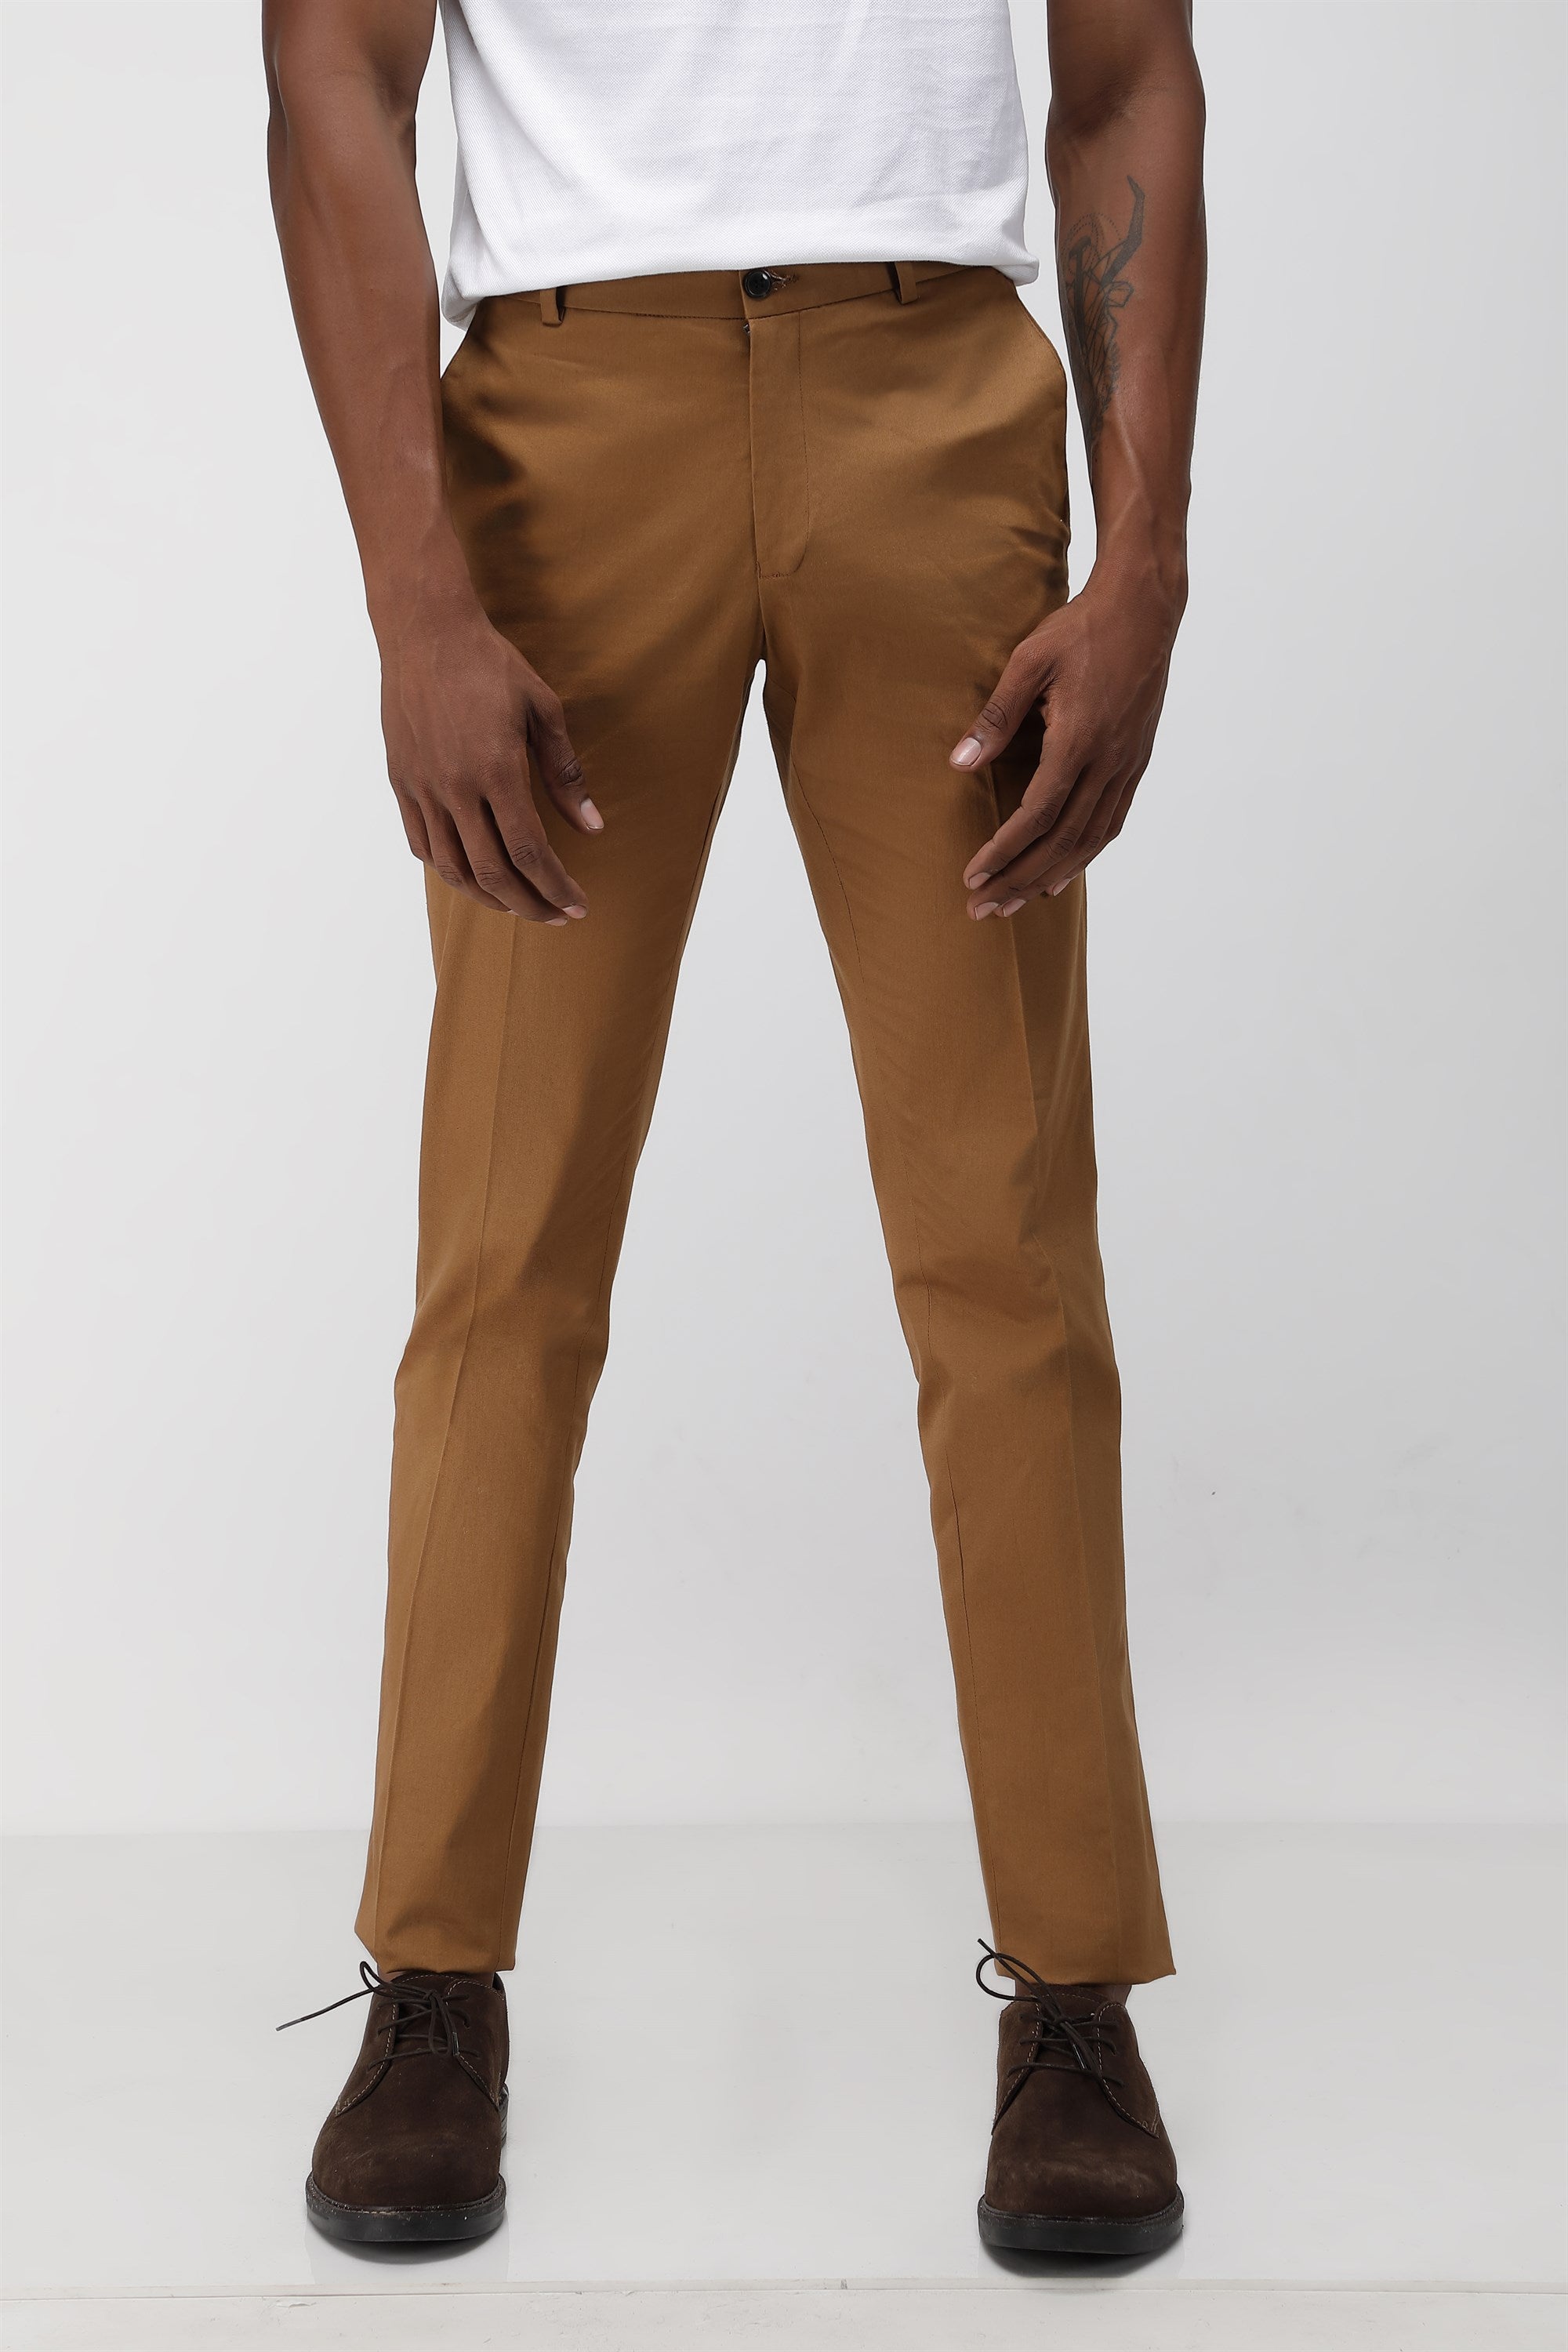 Cotton Mens Slim Fit Trousers Occasion  Party Wear Pattern  Plain at Rs  400  Piece in Coimbatore